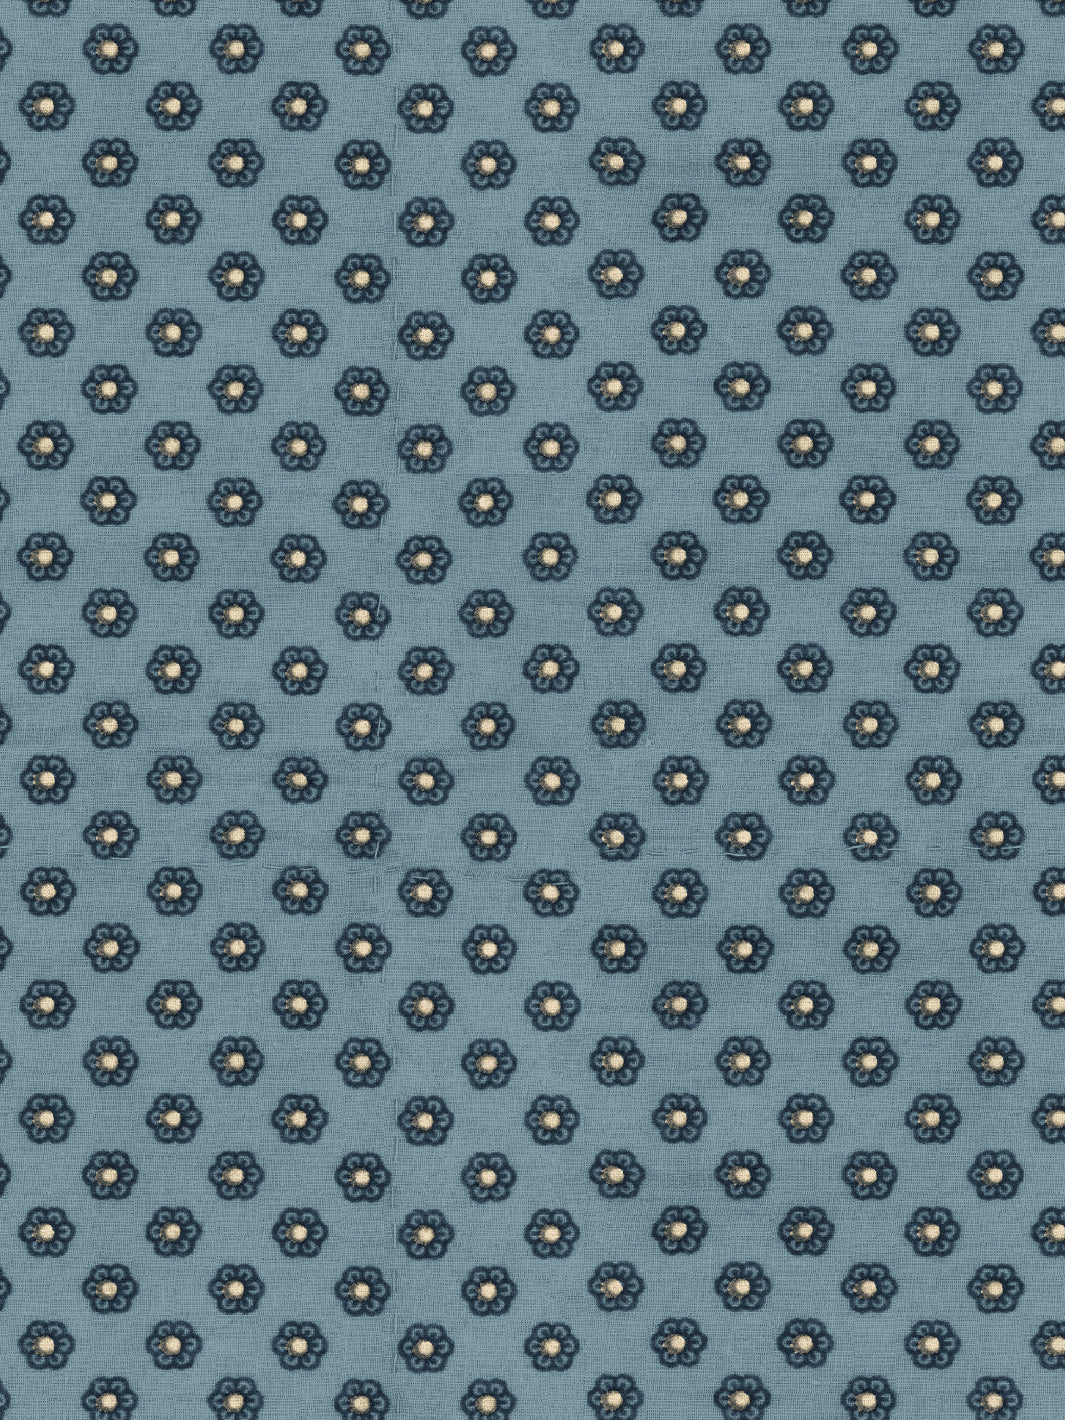 'Ditsy Flower' Wallpaper by Chris Benz - Blue